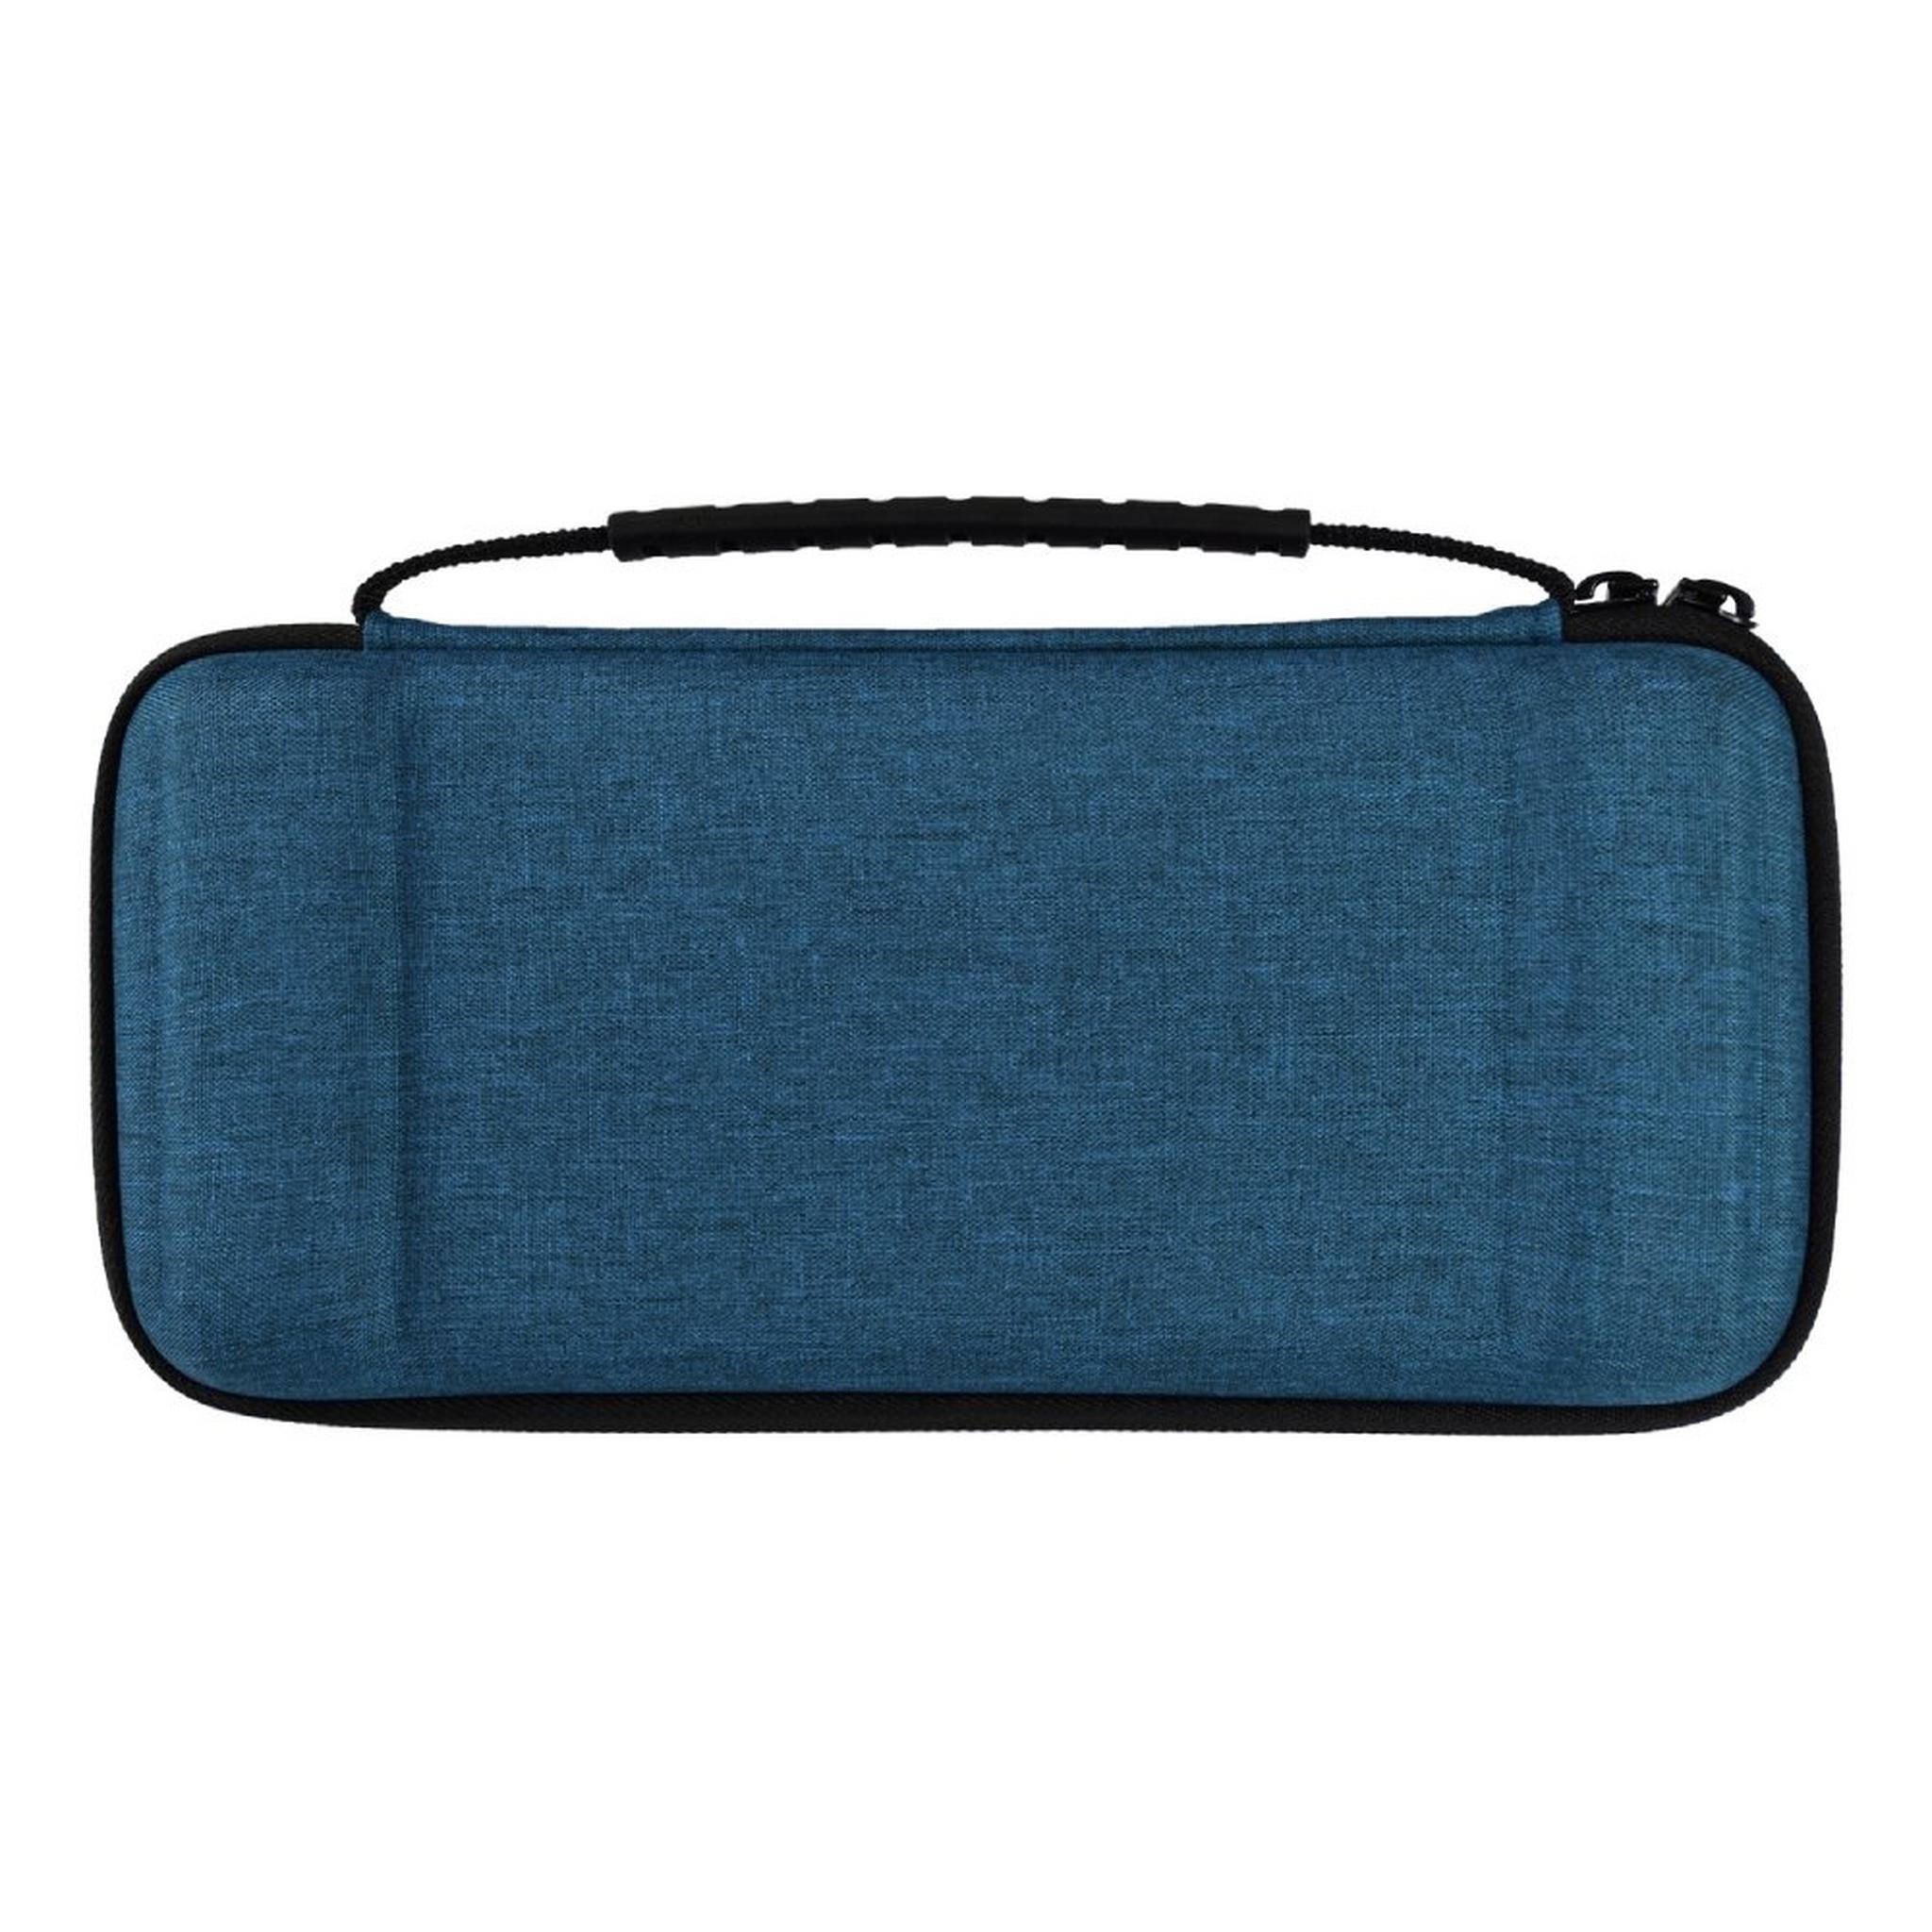 Hori Slim Pouch for Nintendo Switch OLED - Blue